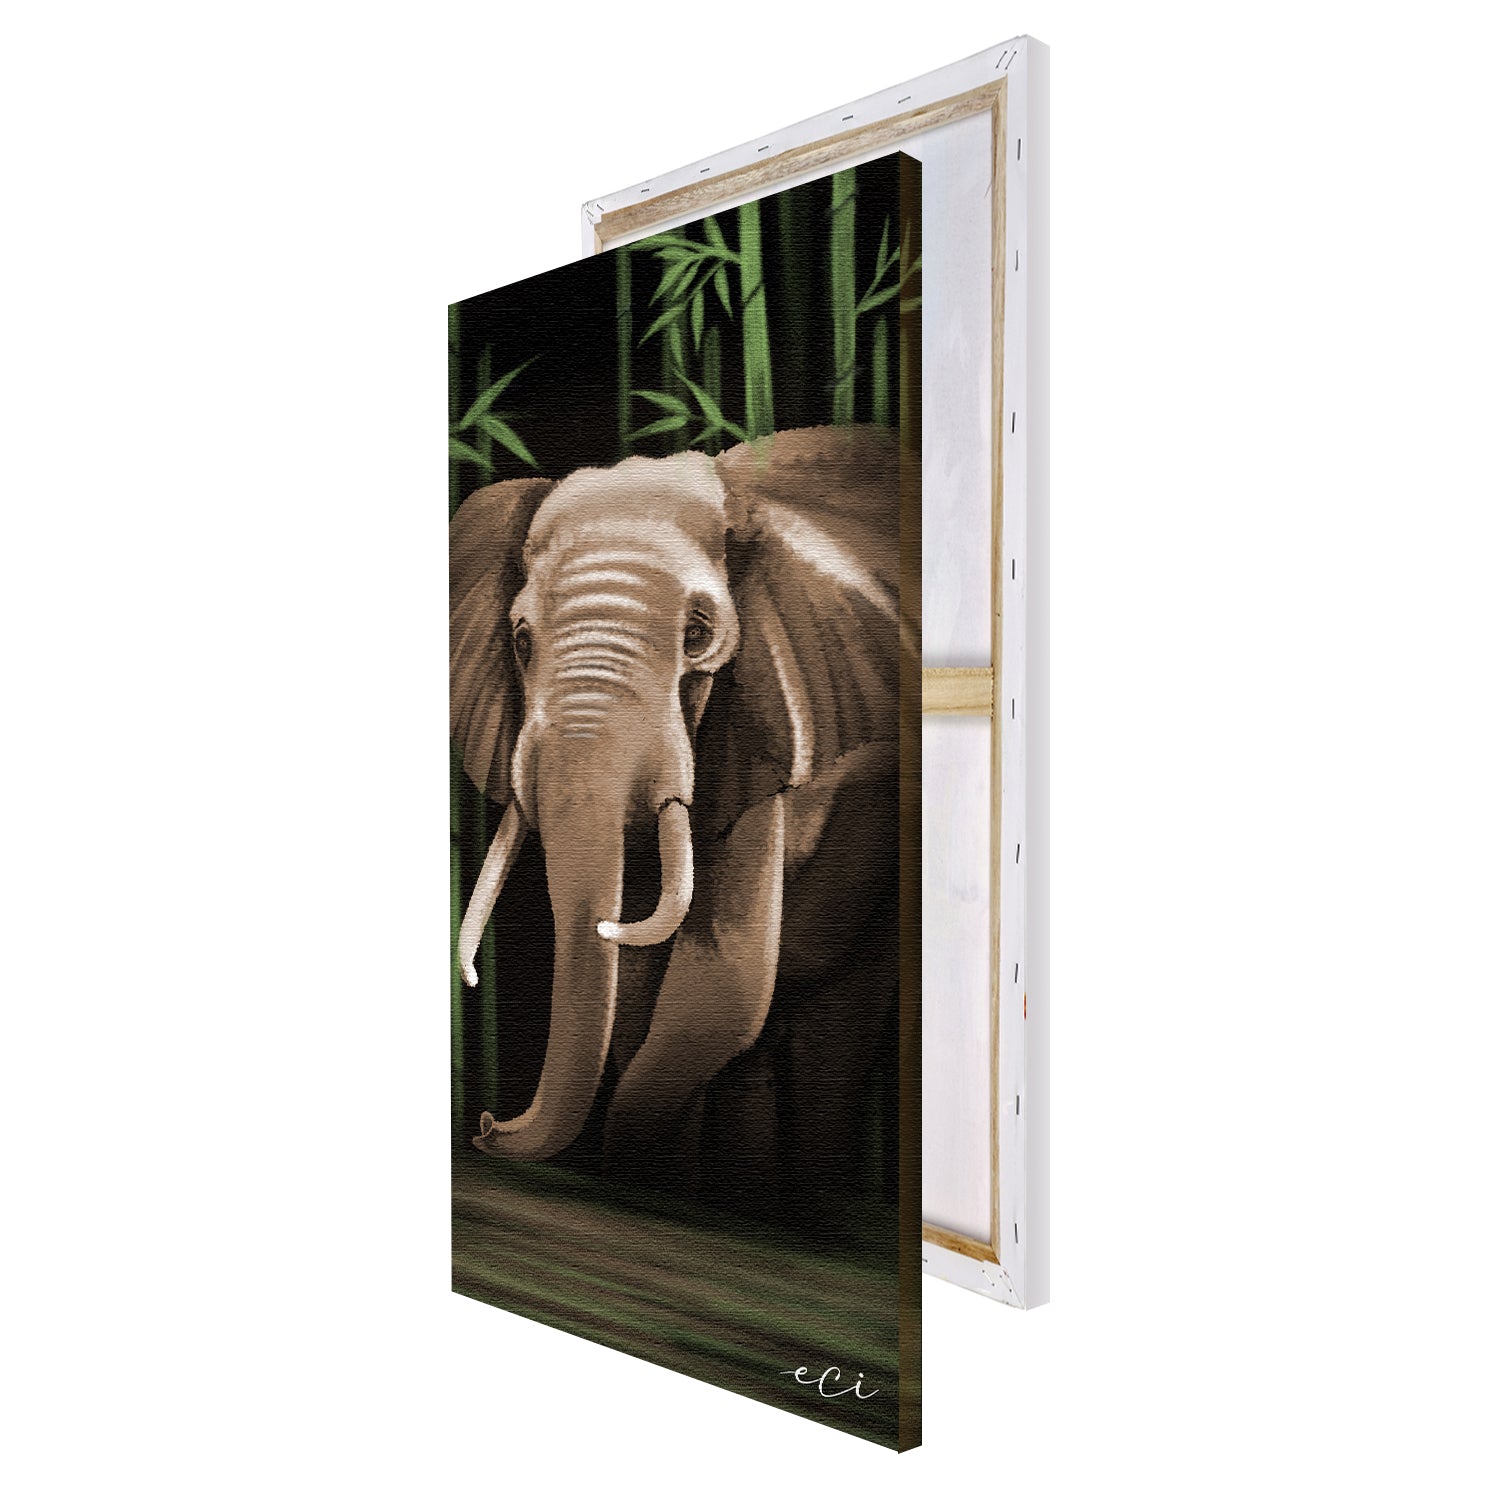 Elephant Walking In A Forest Canvas Painting Digital Printed Animal Wall Art 4